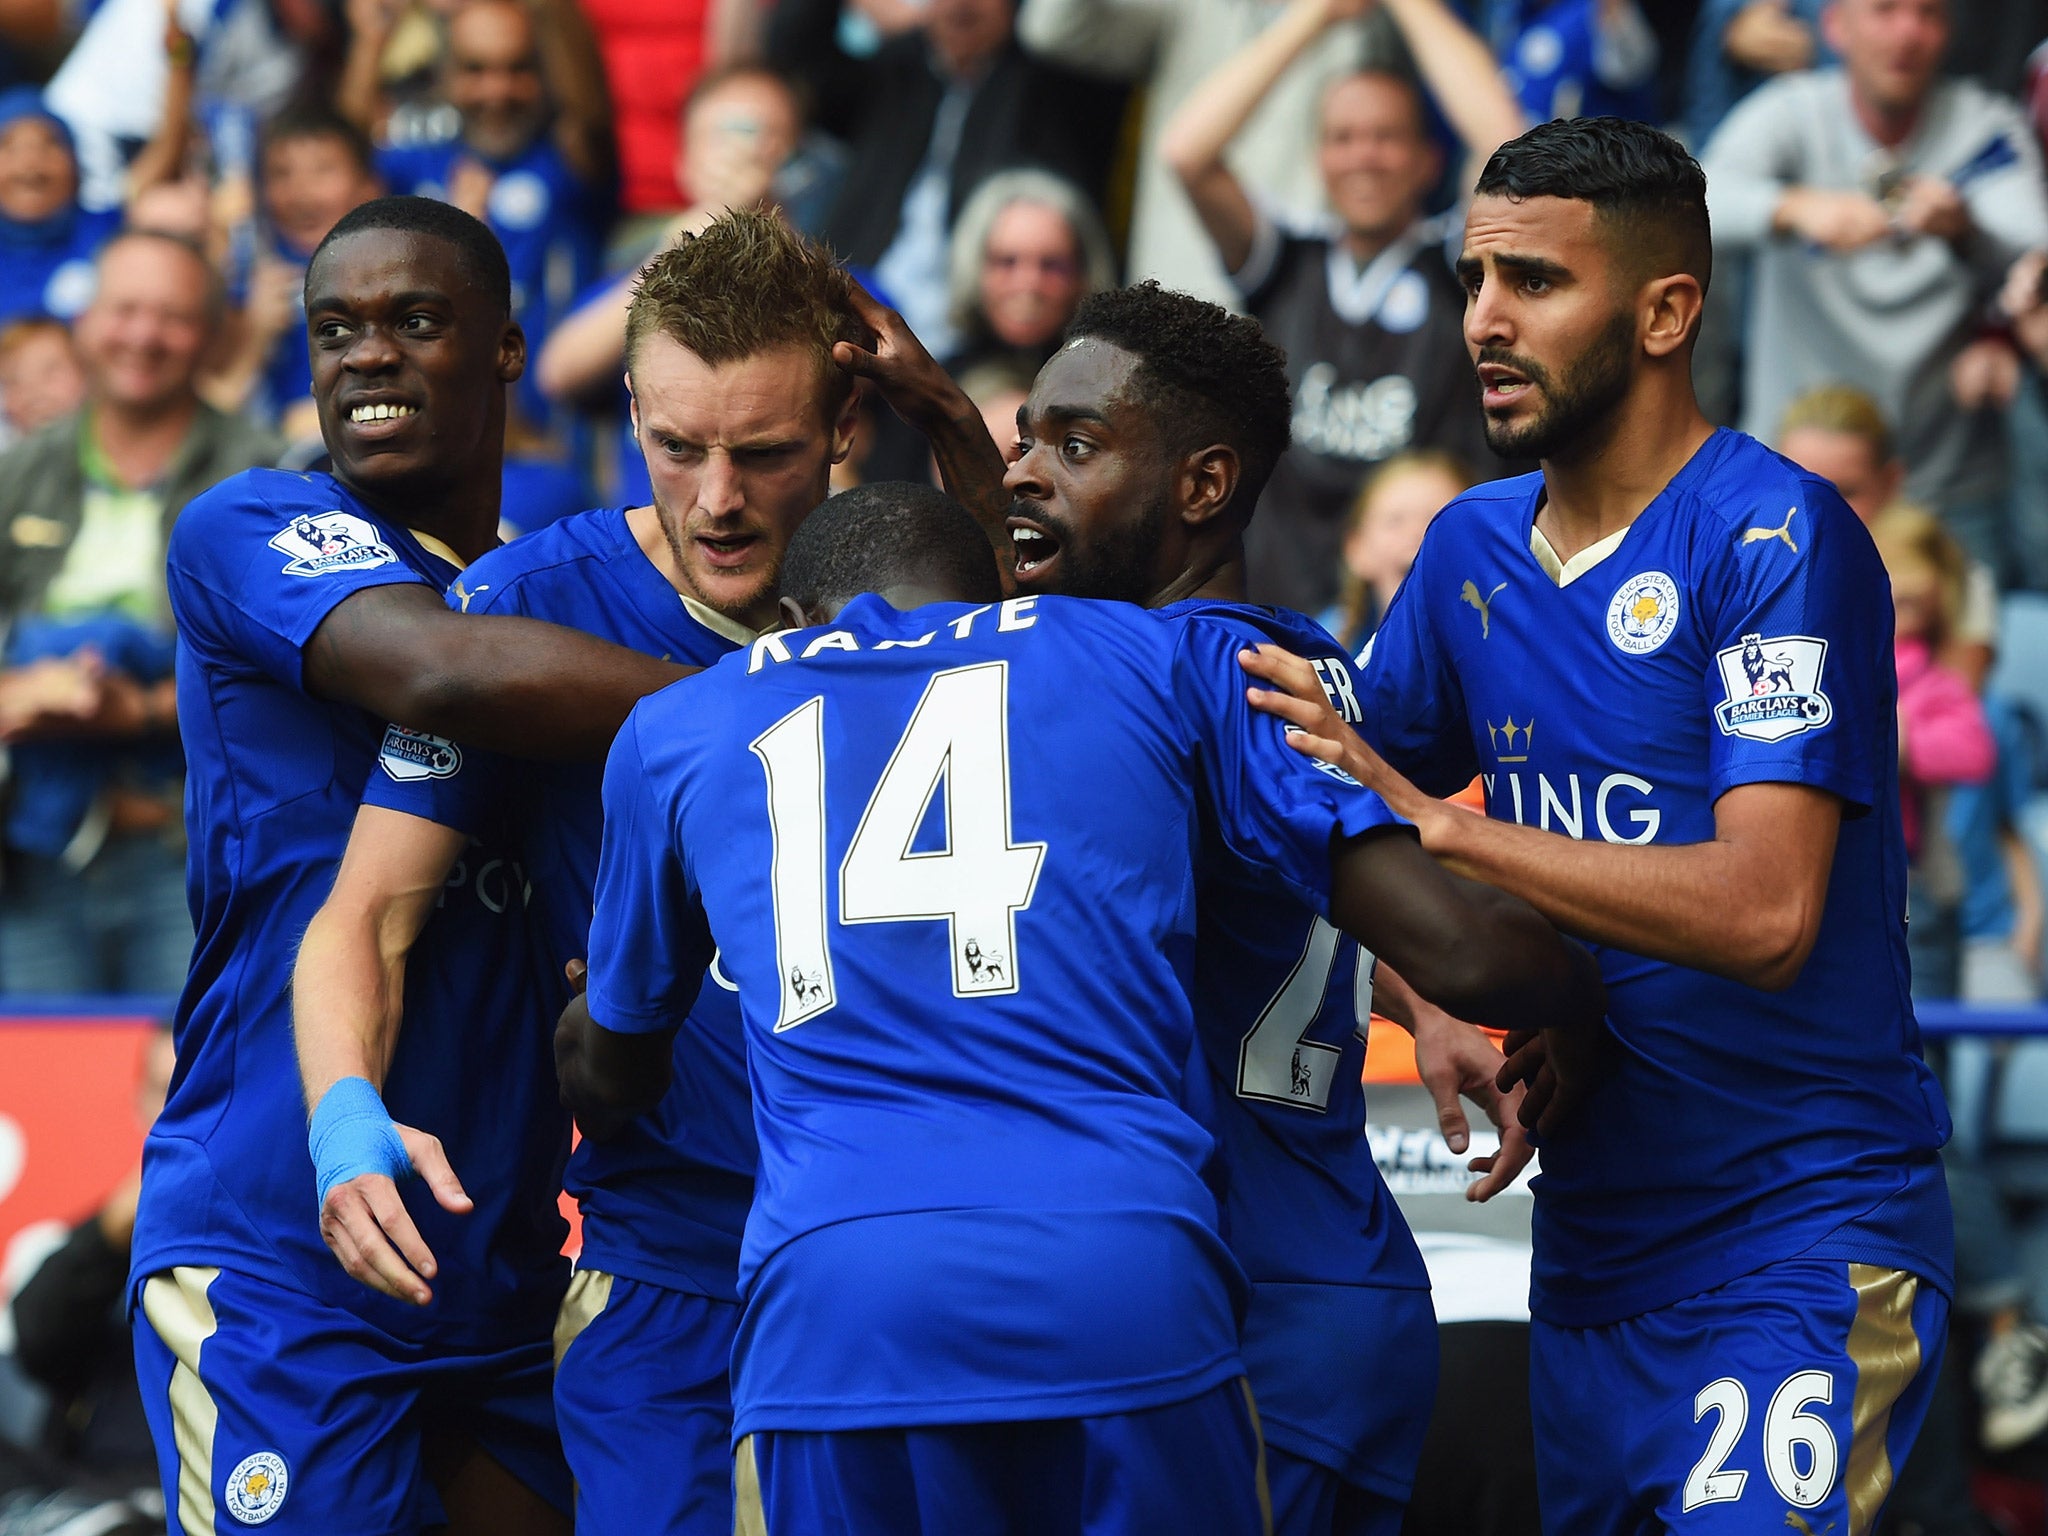 Claudio Rainieri's electrifying Leicester City have surprised many by their start this season